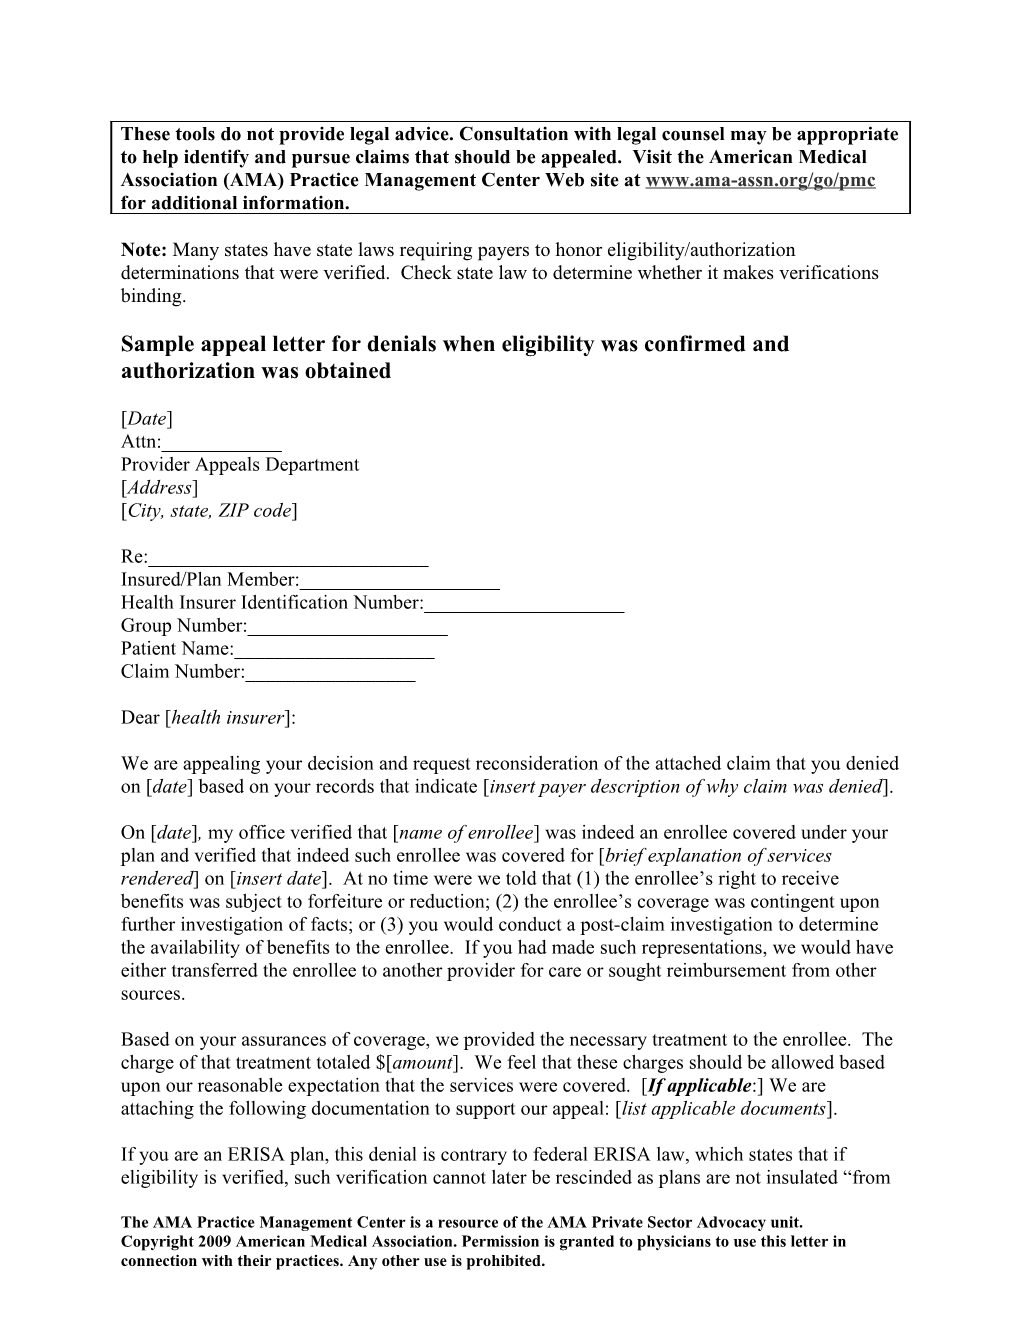 Sample Appeal Letter for Denials When Eligibility Was Confirmed and Authorization Was Obtained